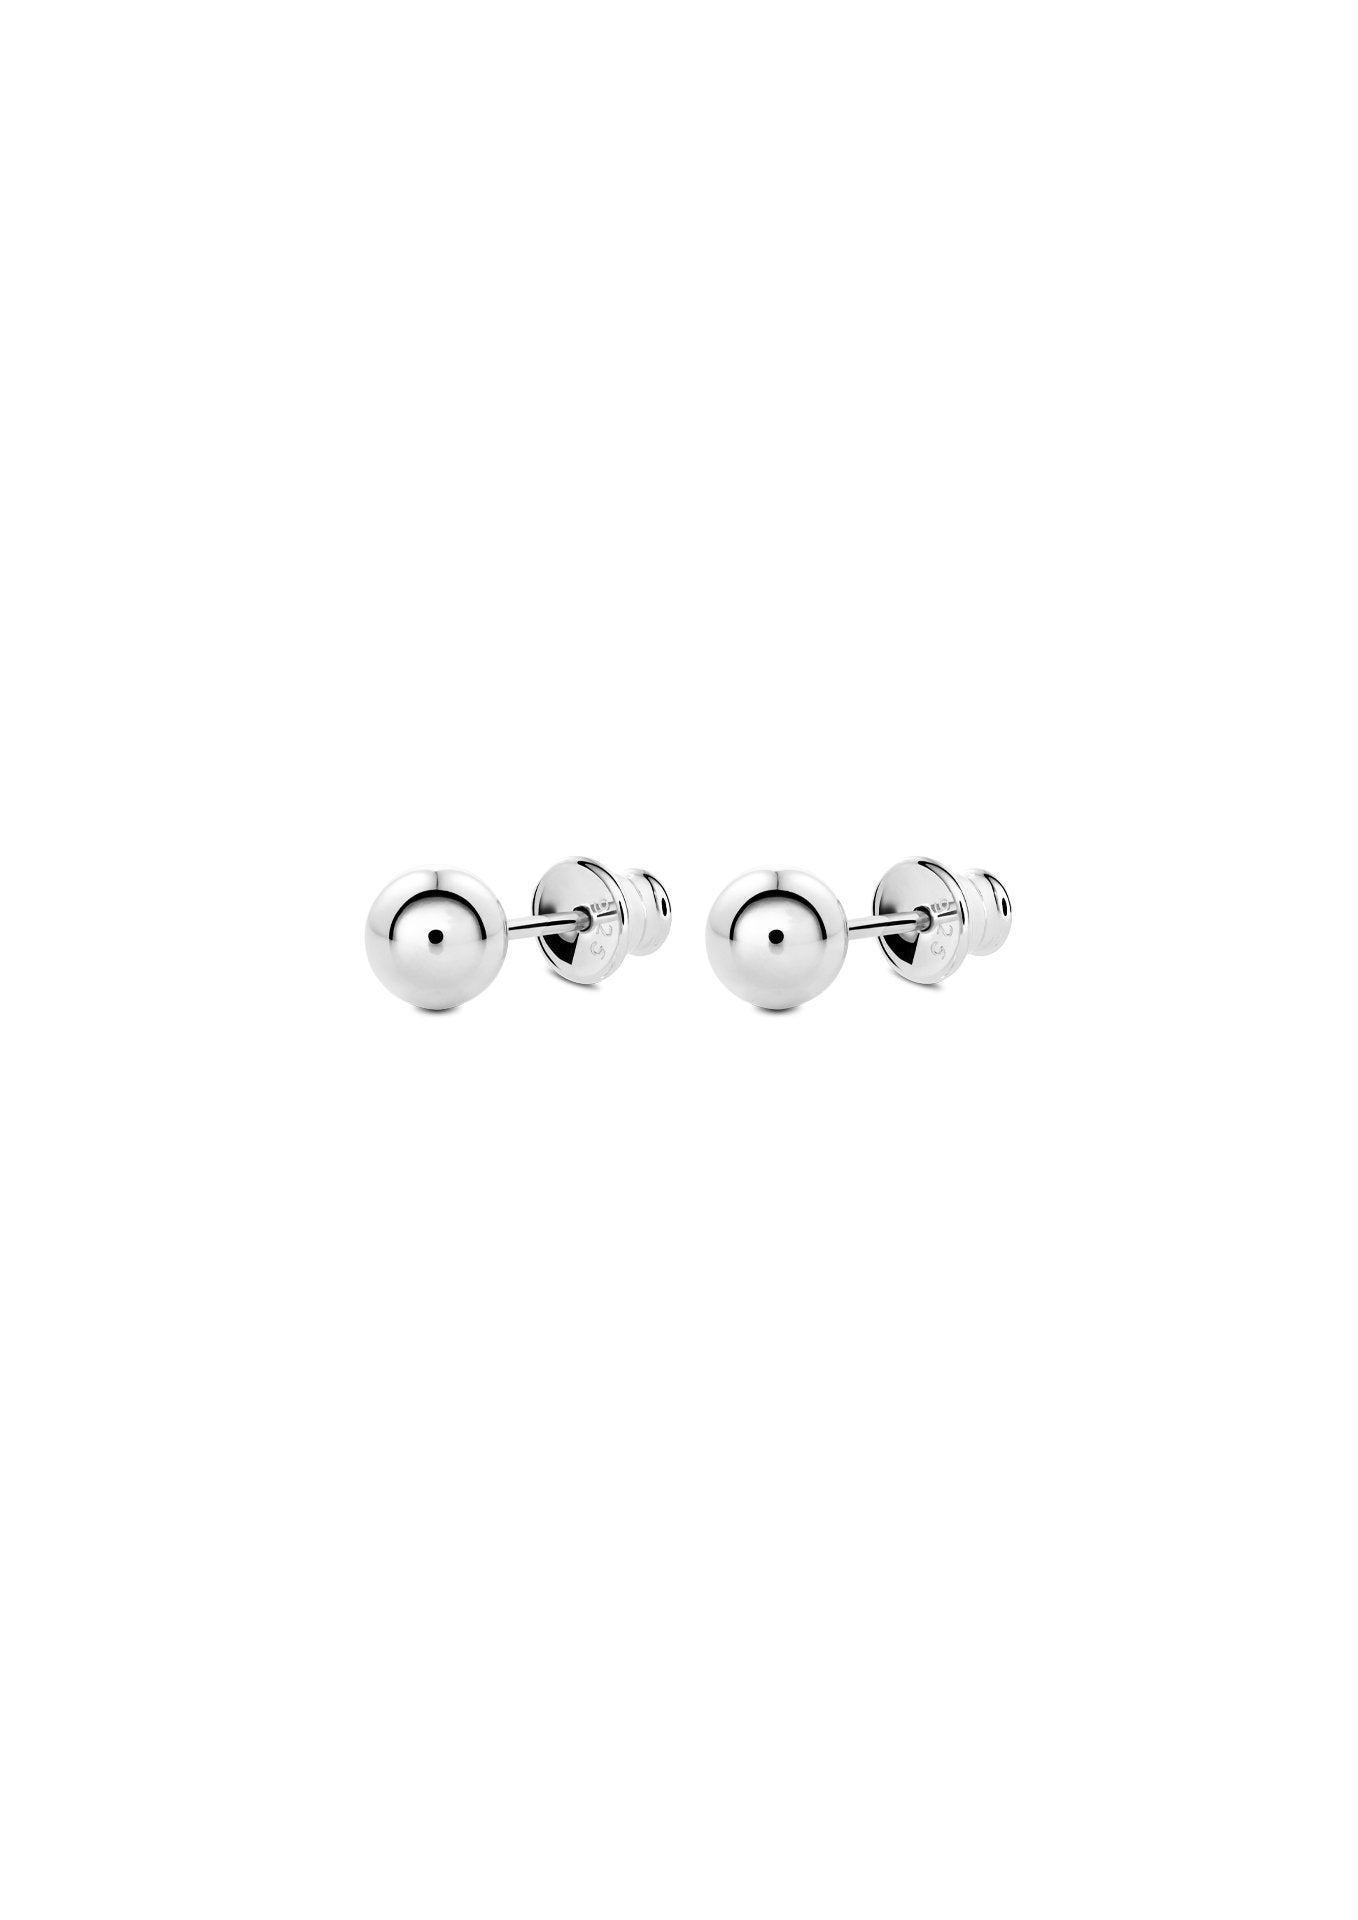 NO MORE accessories Big Bubble Earrings in sterling silver